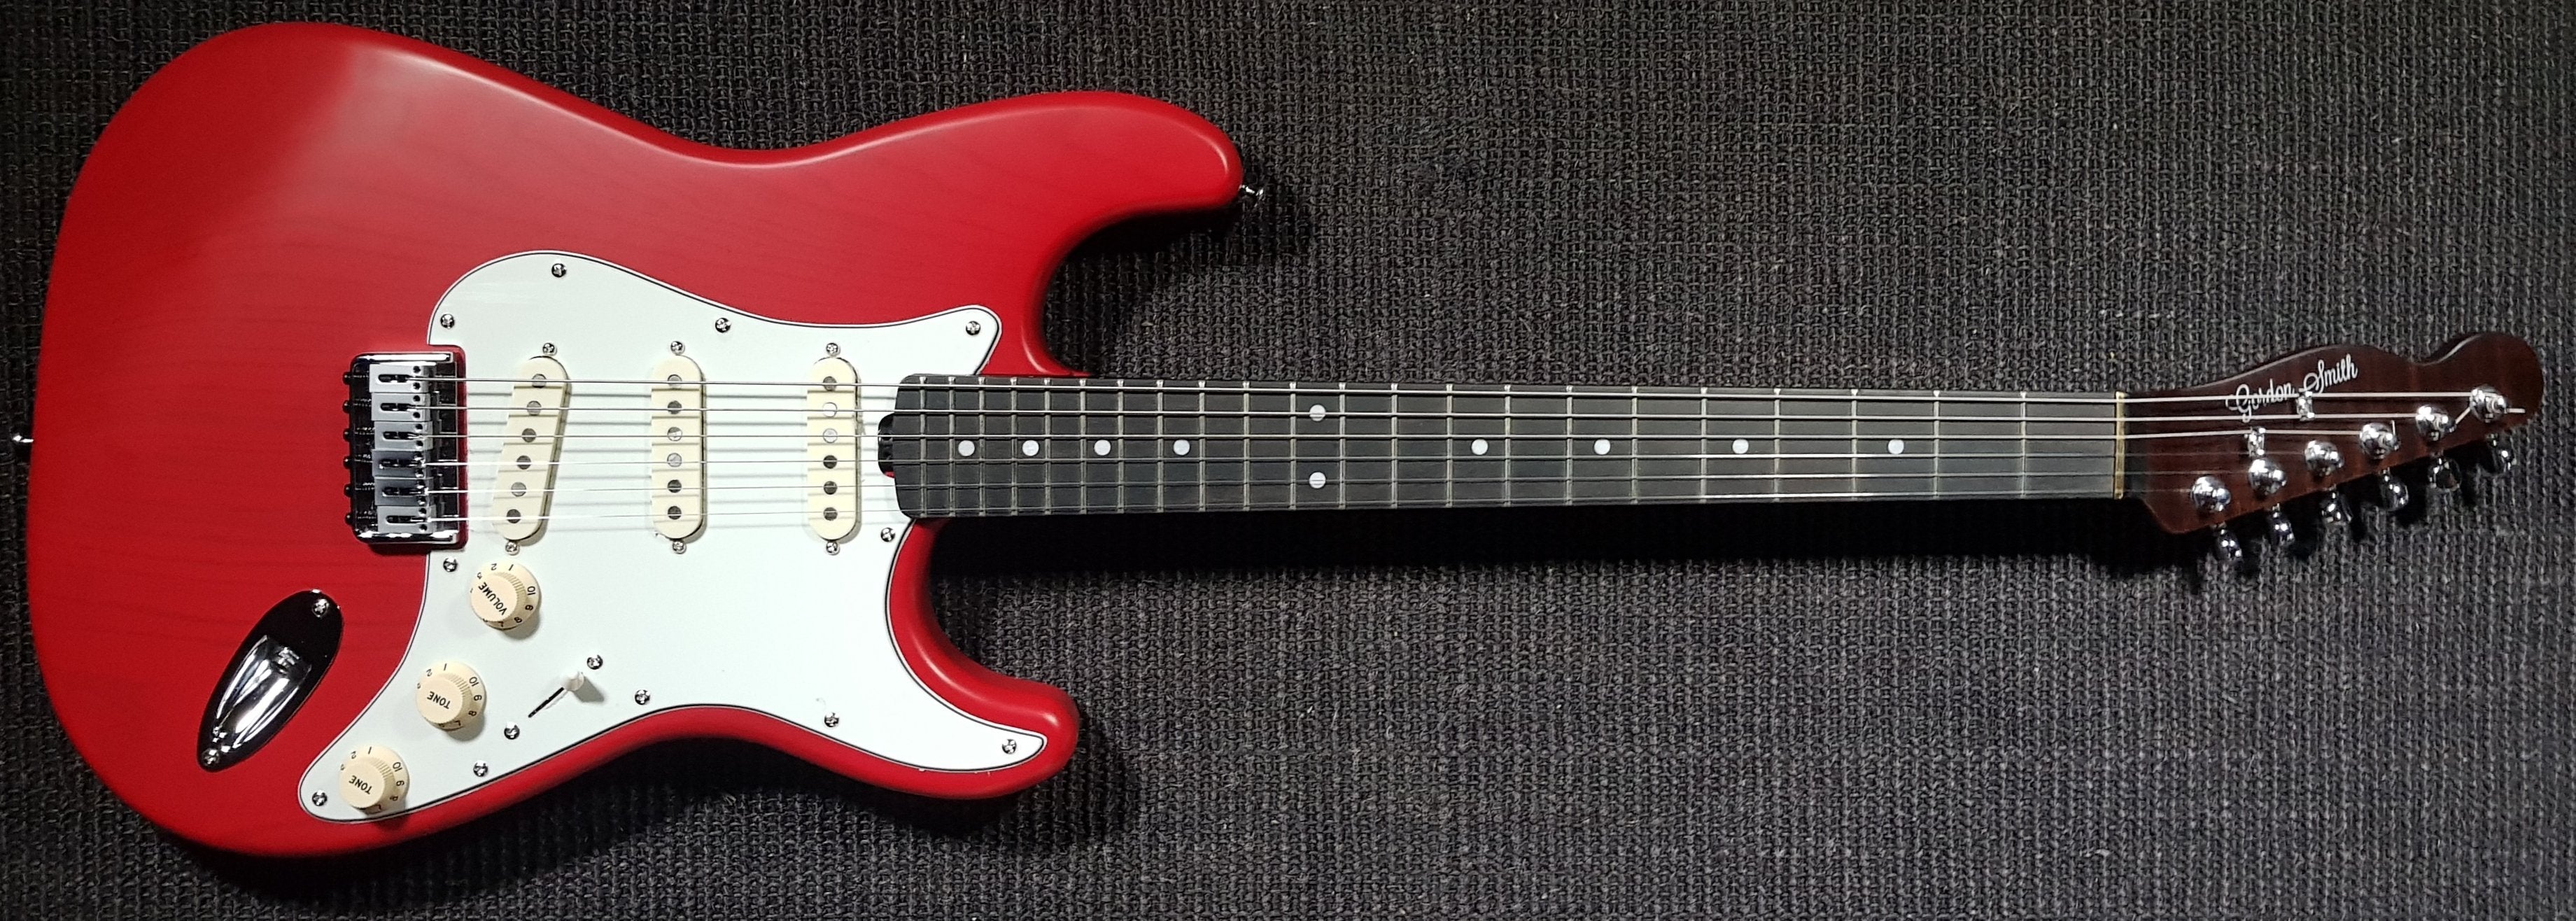 Gordon Smith - Chris Buck Classic S - Trans Red, Electric Guitar for sale at Richards Guitars.